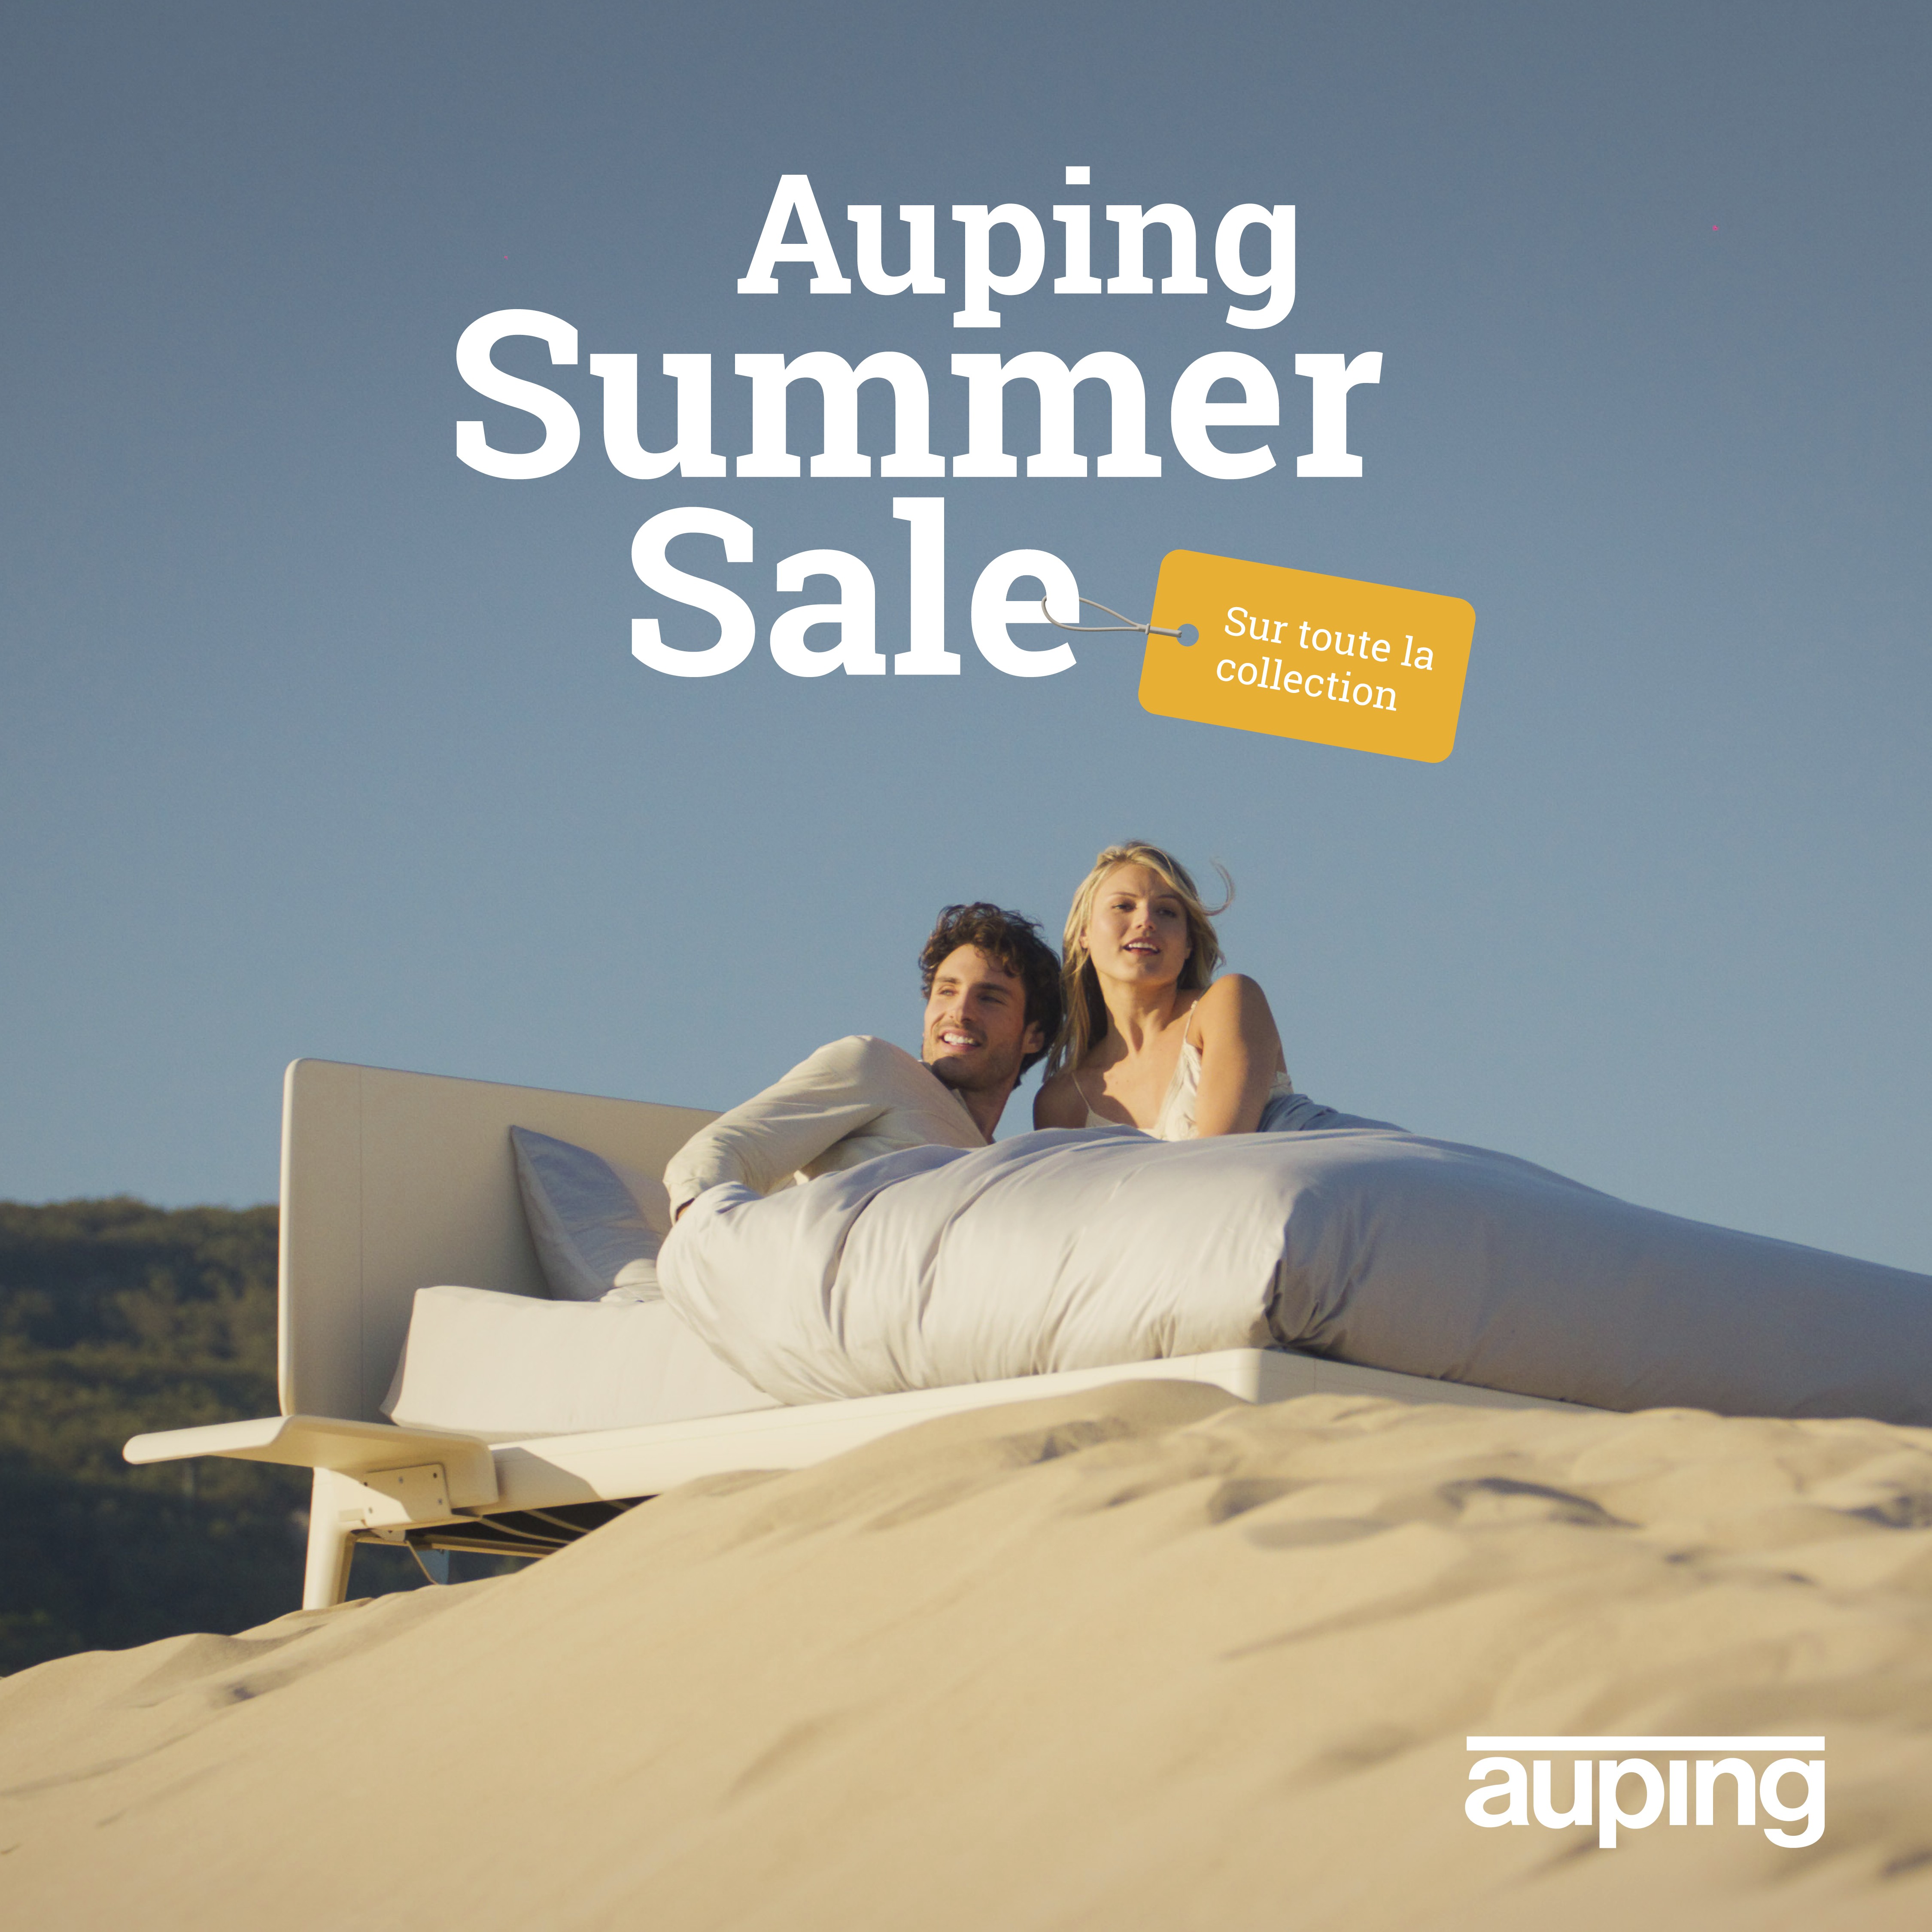 Auping Summer Sale